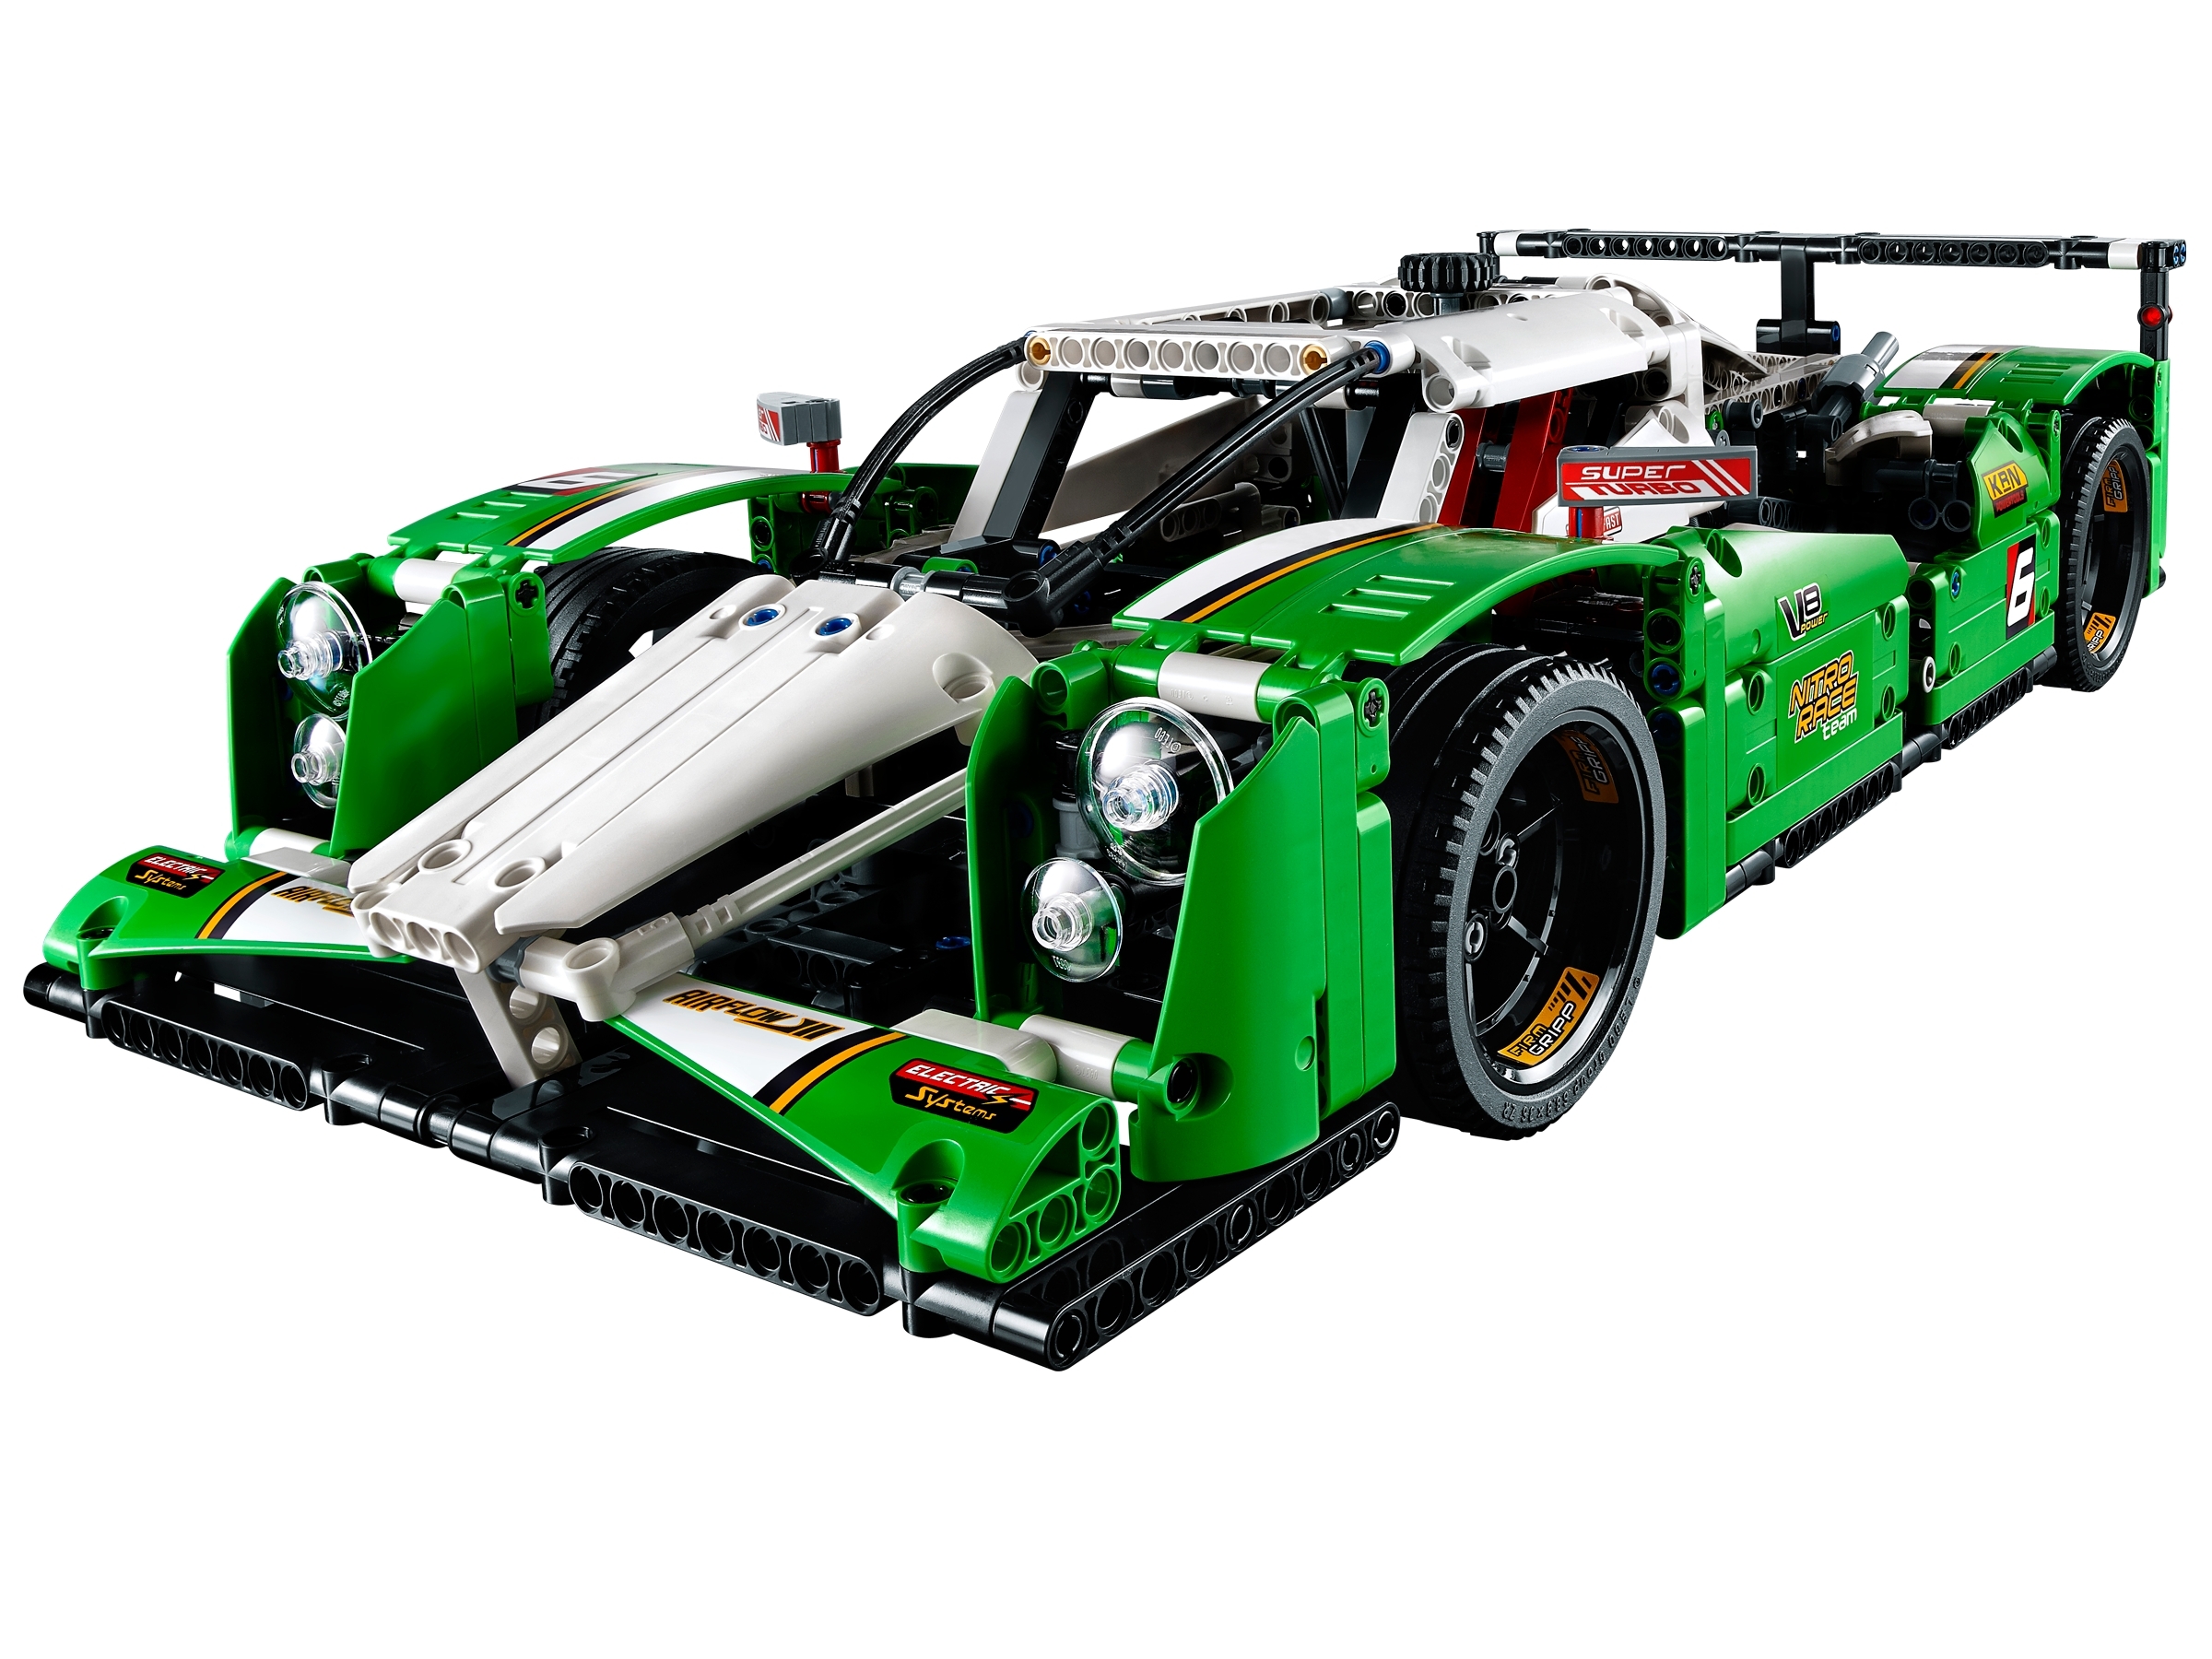 24 Hours Race Car 42039 | Technic™ | Buy online at the LEGO® Shop US